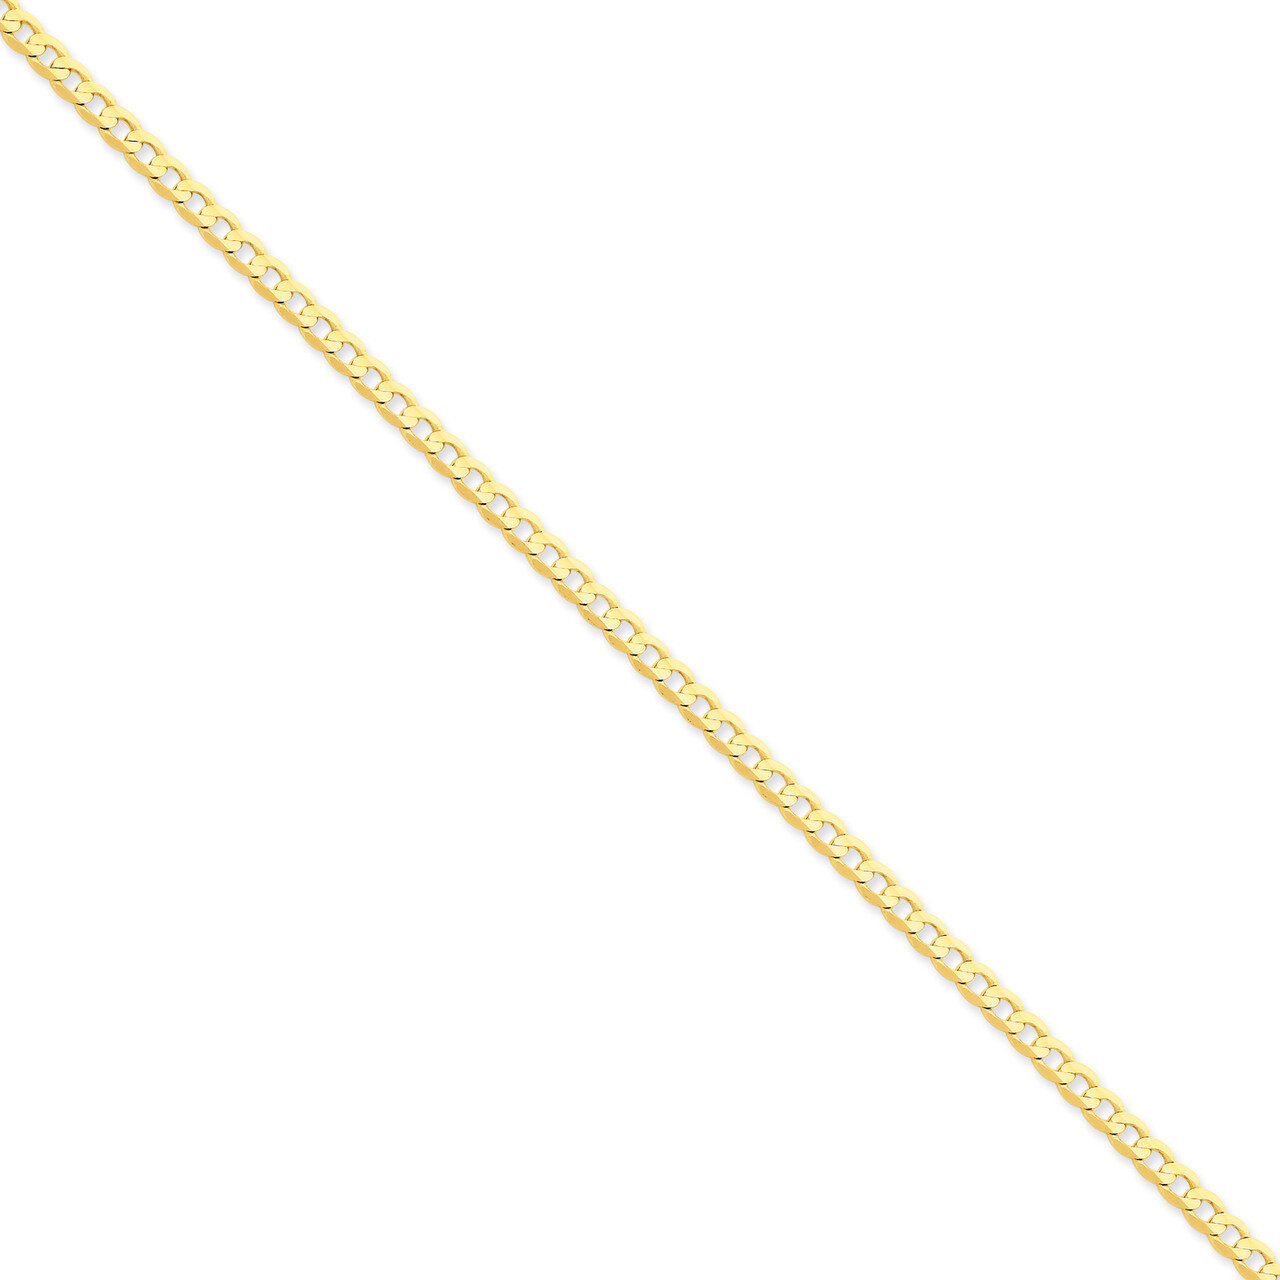 3.8mm Concave Curb Chain 7 Inch 14k Gold LCR100-7